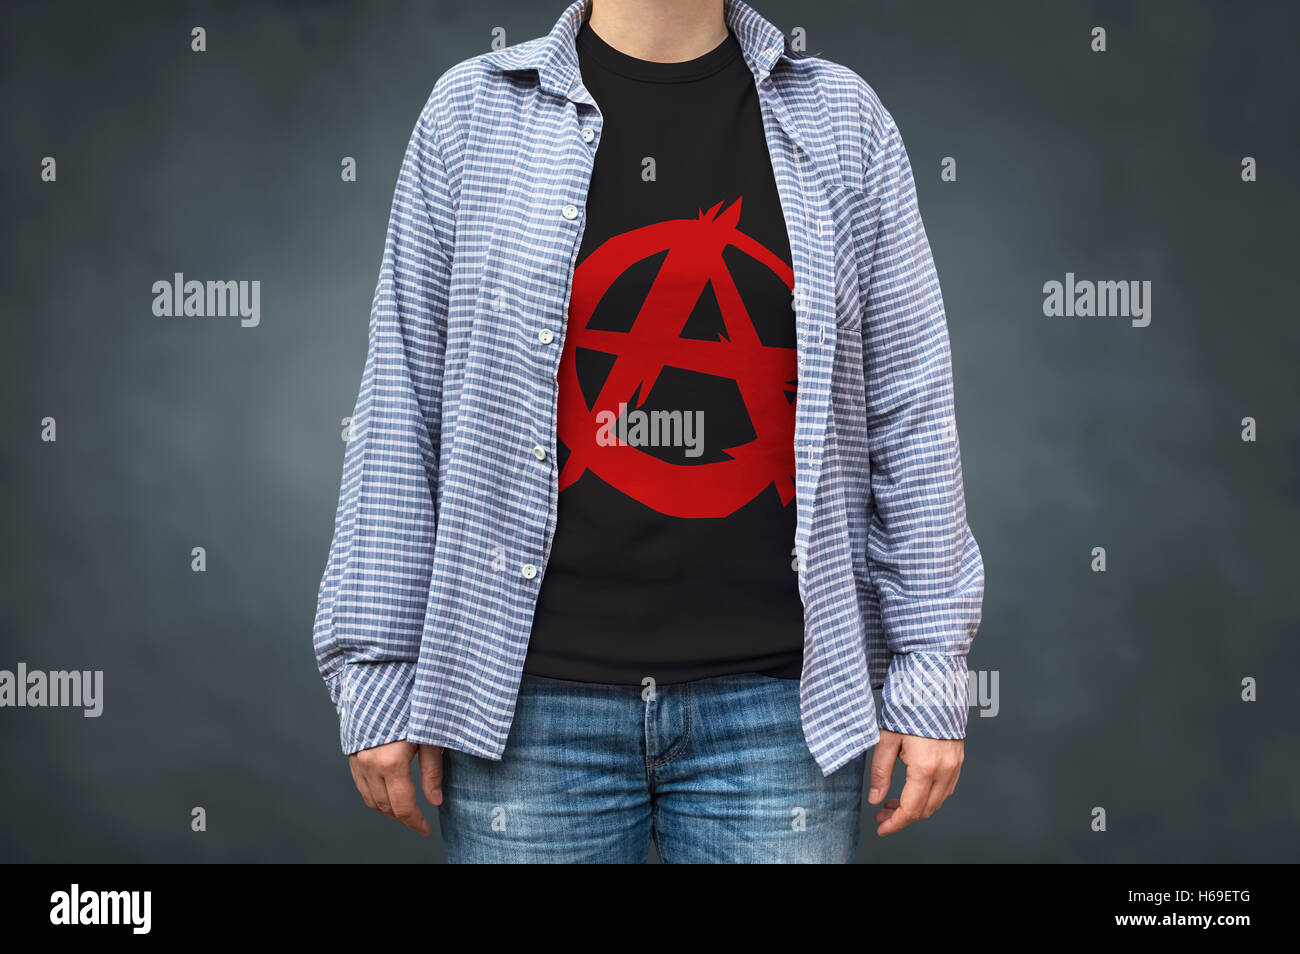 Anarchy symbol print on t-shirt, political message. Selective focus. Stock Photo